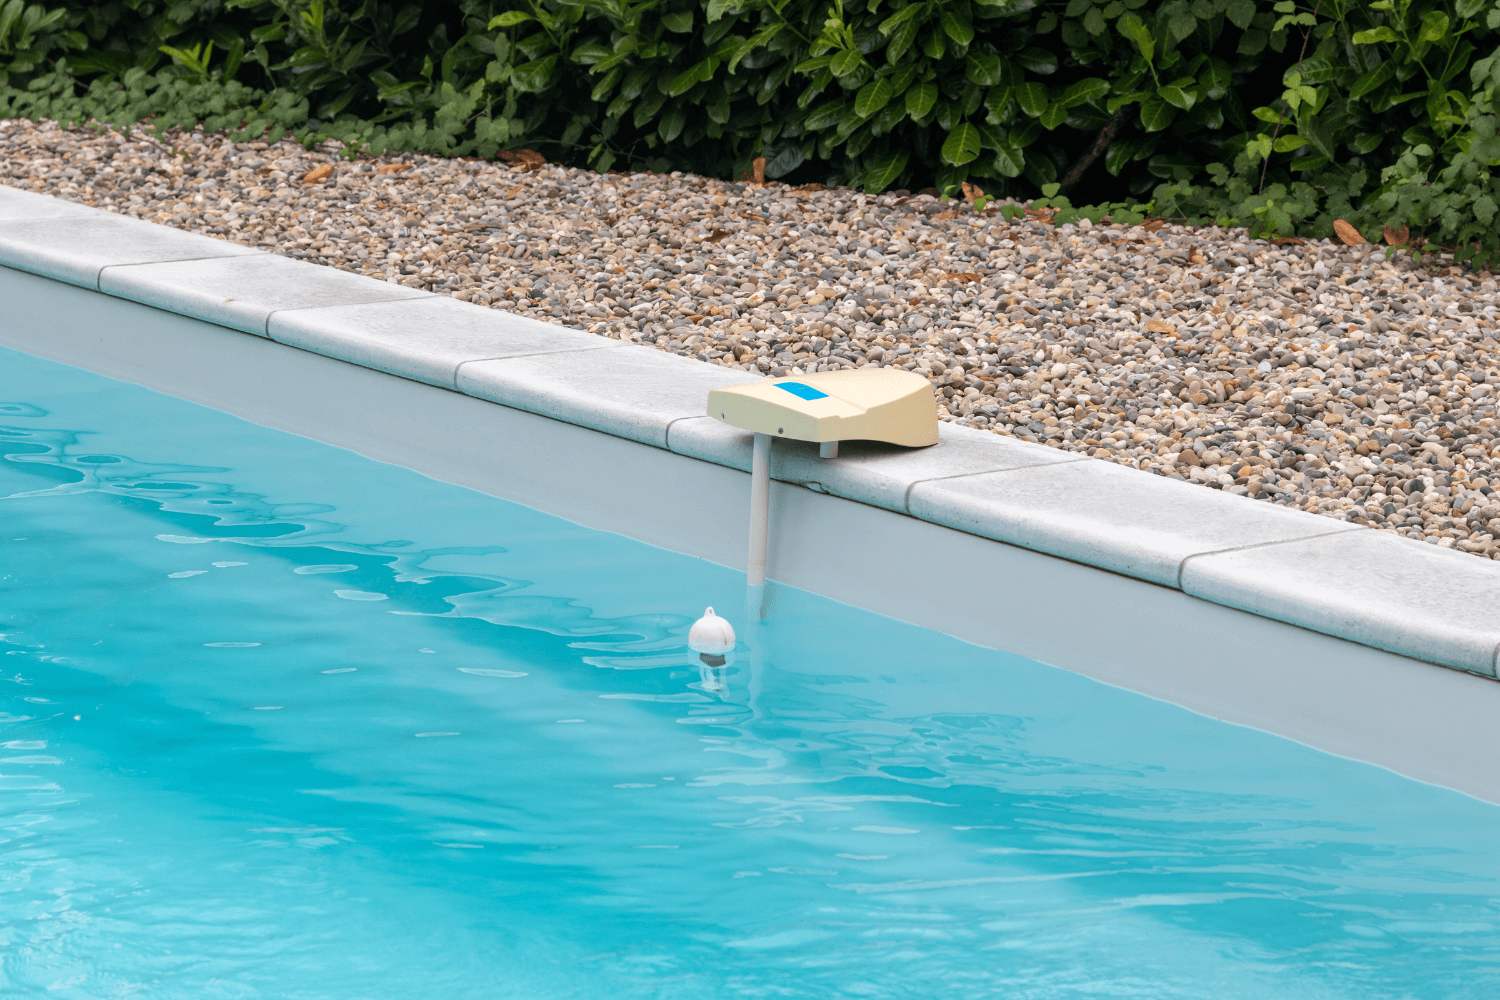 Swimming pool safety alarm installed